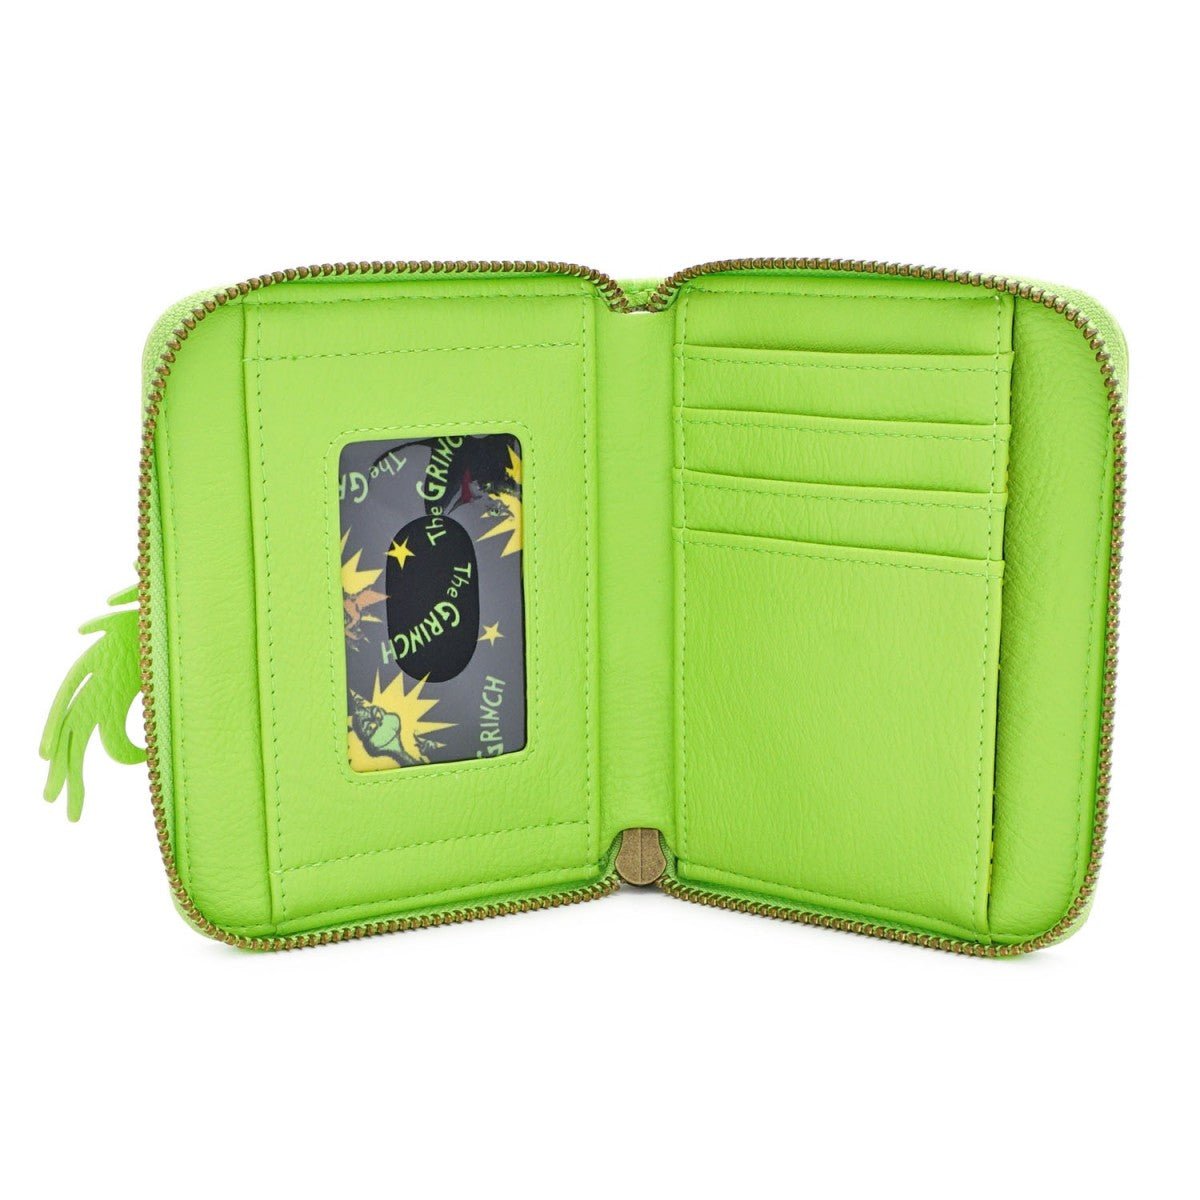 Loungefly X Dr. Seuss The Grinch Cosplay Zip Around Purse - GeekCore